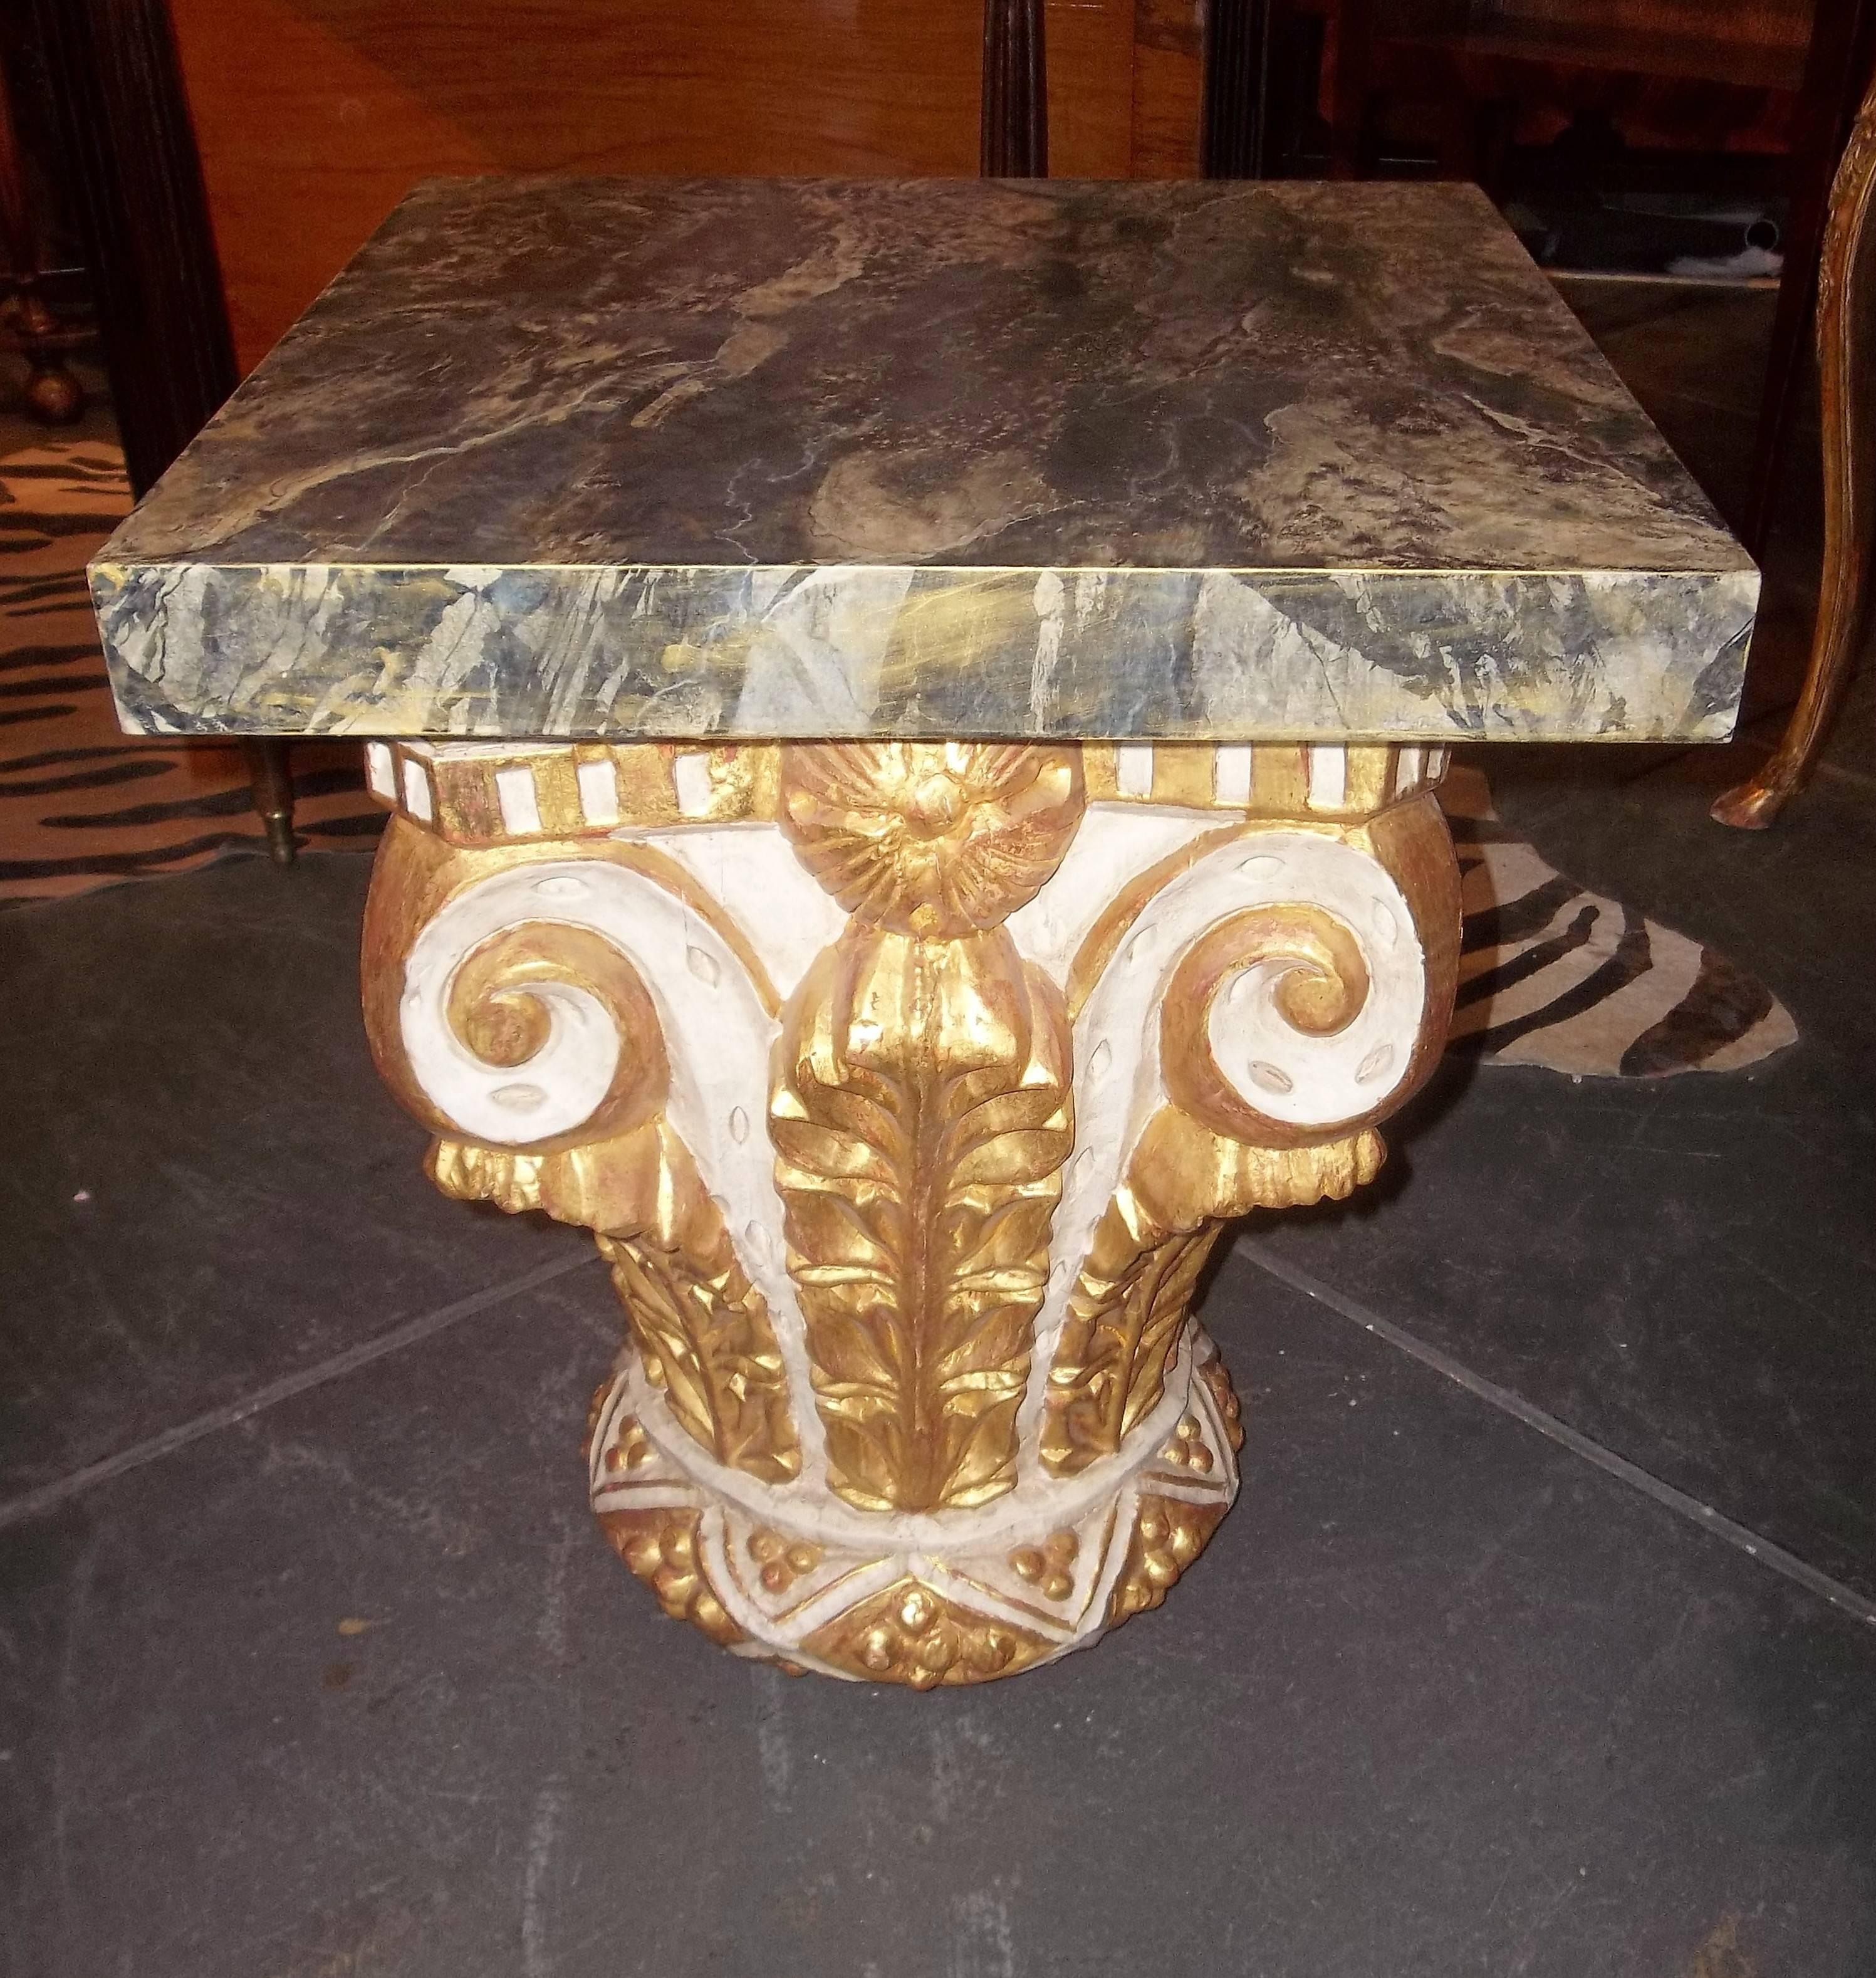 With a later imitation marble top. The architectural capital of carved wood, probably early 19th century with later gilt or refreshed decoration. Showing usual signs of time, wear and use.

As being solid wood (heavy) this will not go UPS and will